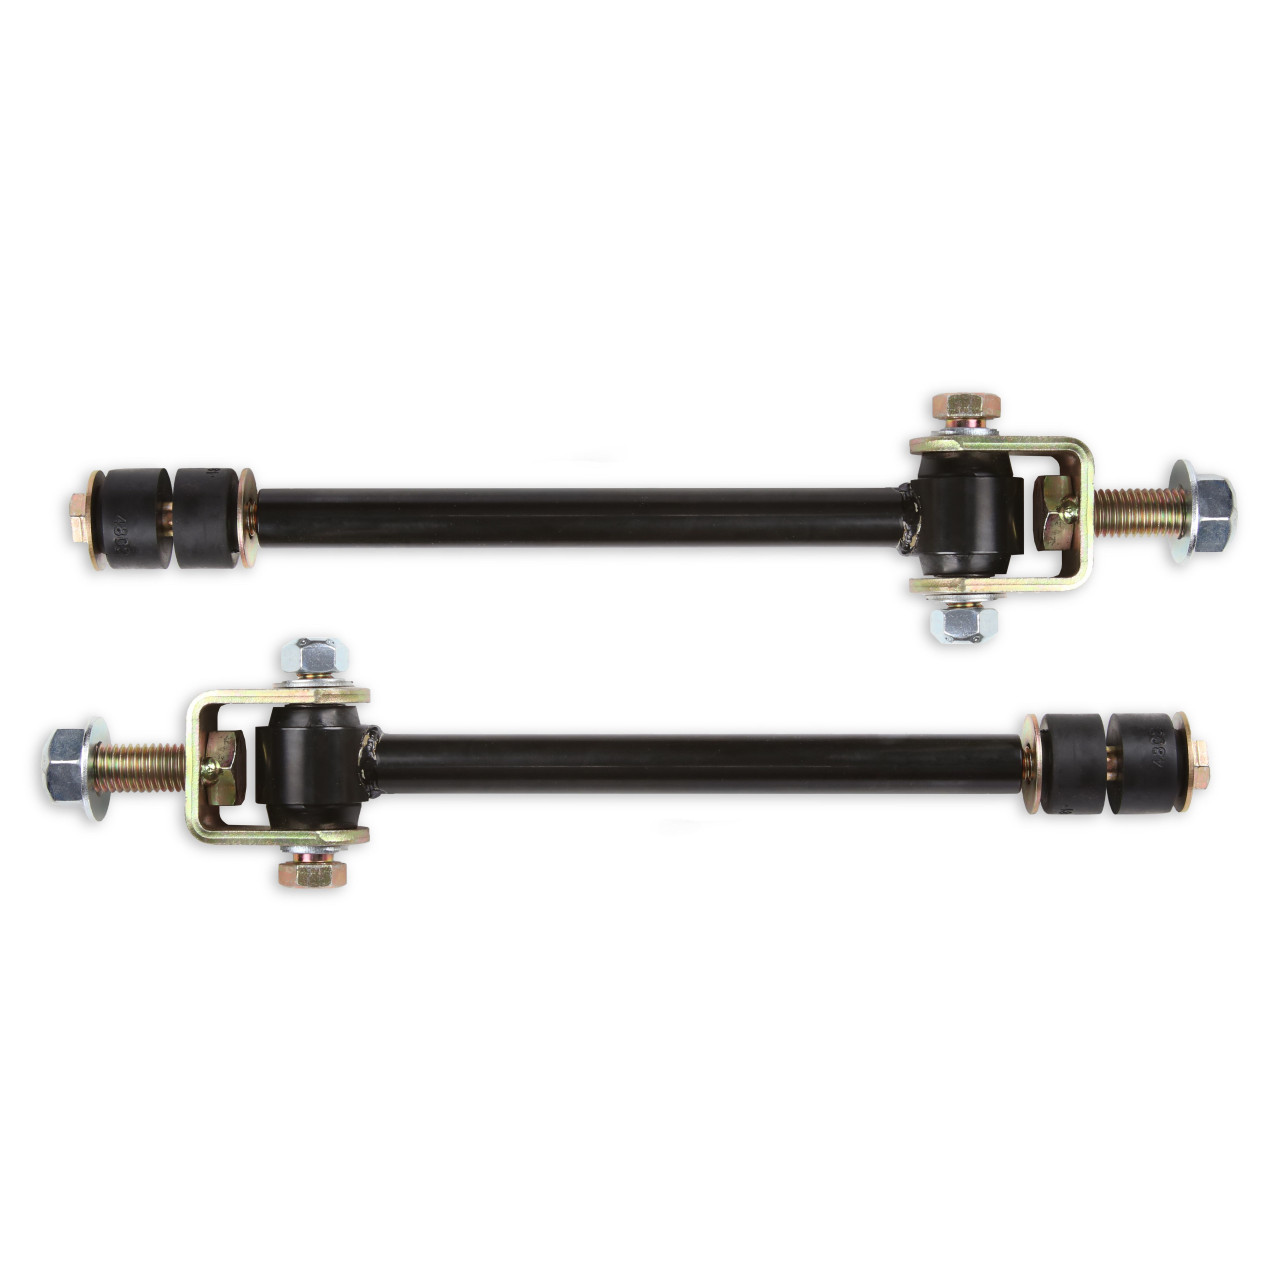 SCITOO Steering Rear Sway Bar Link Stabilizer Bar fit 2000-2014 Chevrolet Avalanche 1500 Suburban 1500 Tahoe GMC Yukon XL 1500 Cadillac Escalade ESV EXT Hummer H2 Jeep Wrangler